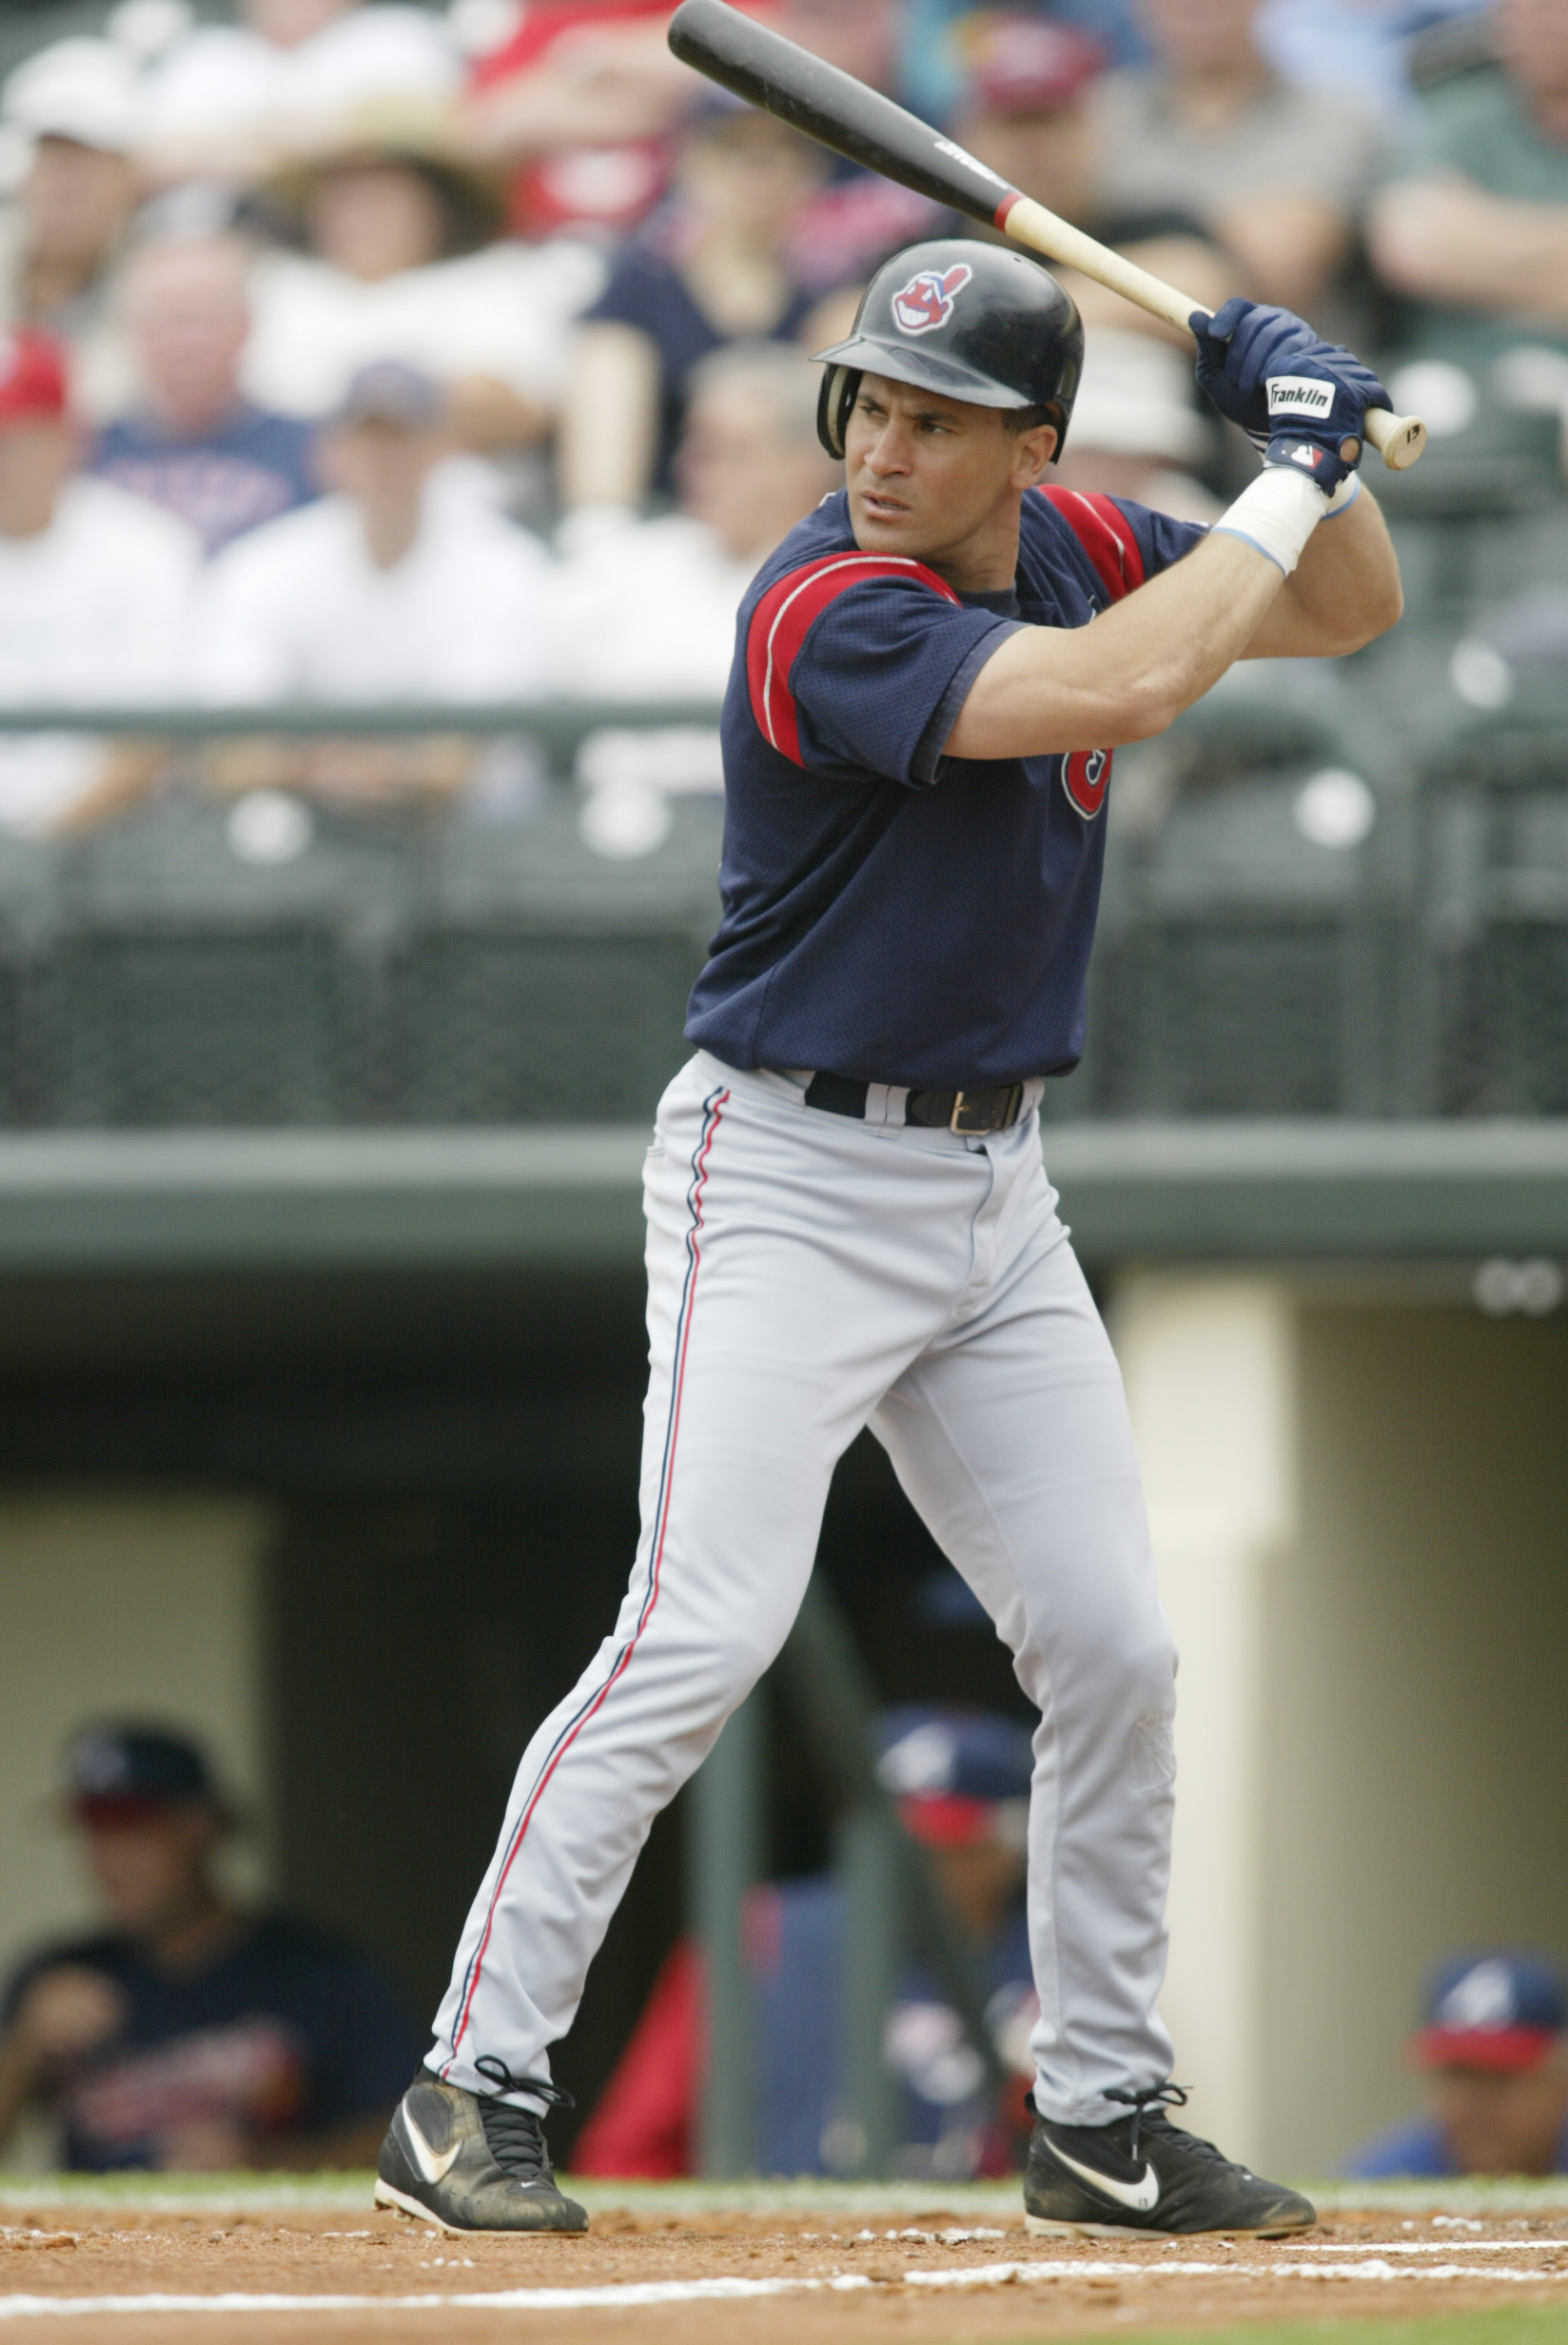 7 Mar 2002: Omar Vizquel #13 of the Cleveland Indians at bat against the Atlanta Braves during the spring training game at the Wide World of Sports Complex in Lake Buena Vista, Florida. DIGITAL IMAGE. Mandatory Credit: Andy Lyons/Getty Images